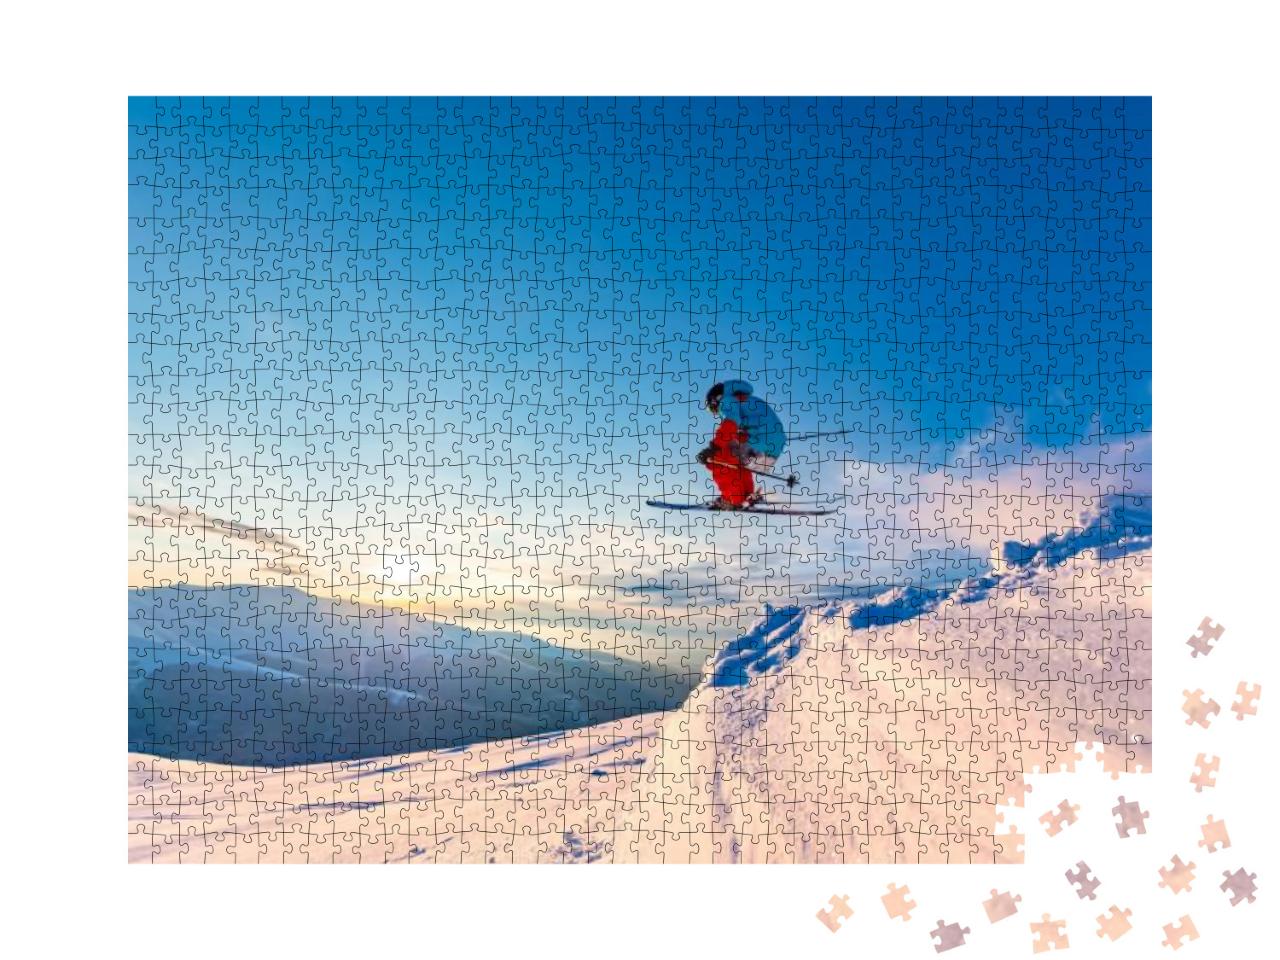 Good Skiing in the Snowy Mountains, Carpathians, Ukraine... Jigsaw Puzzle with 1000 pieces